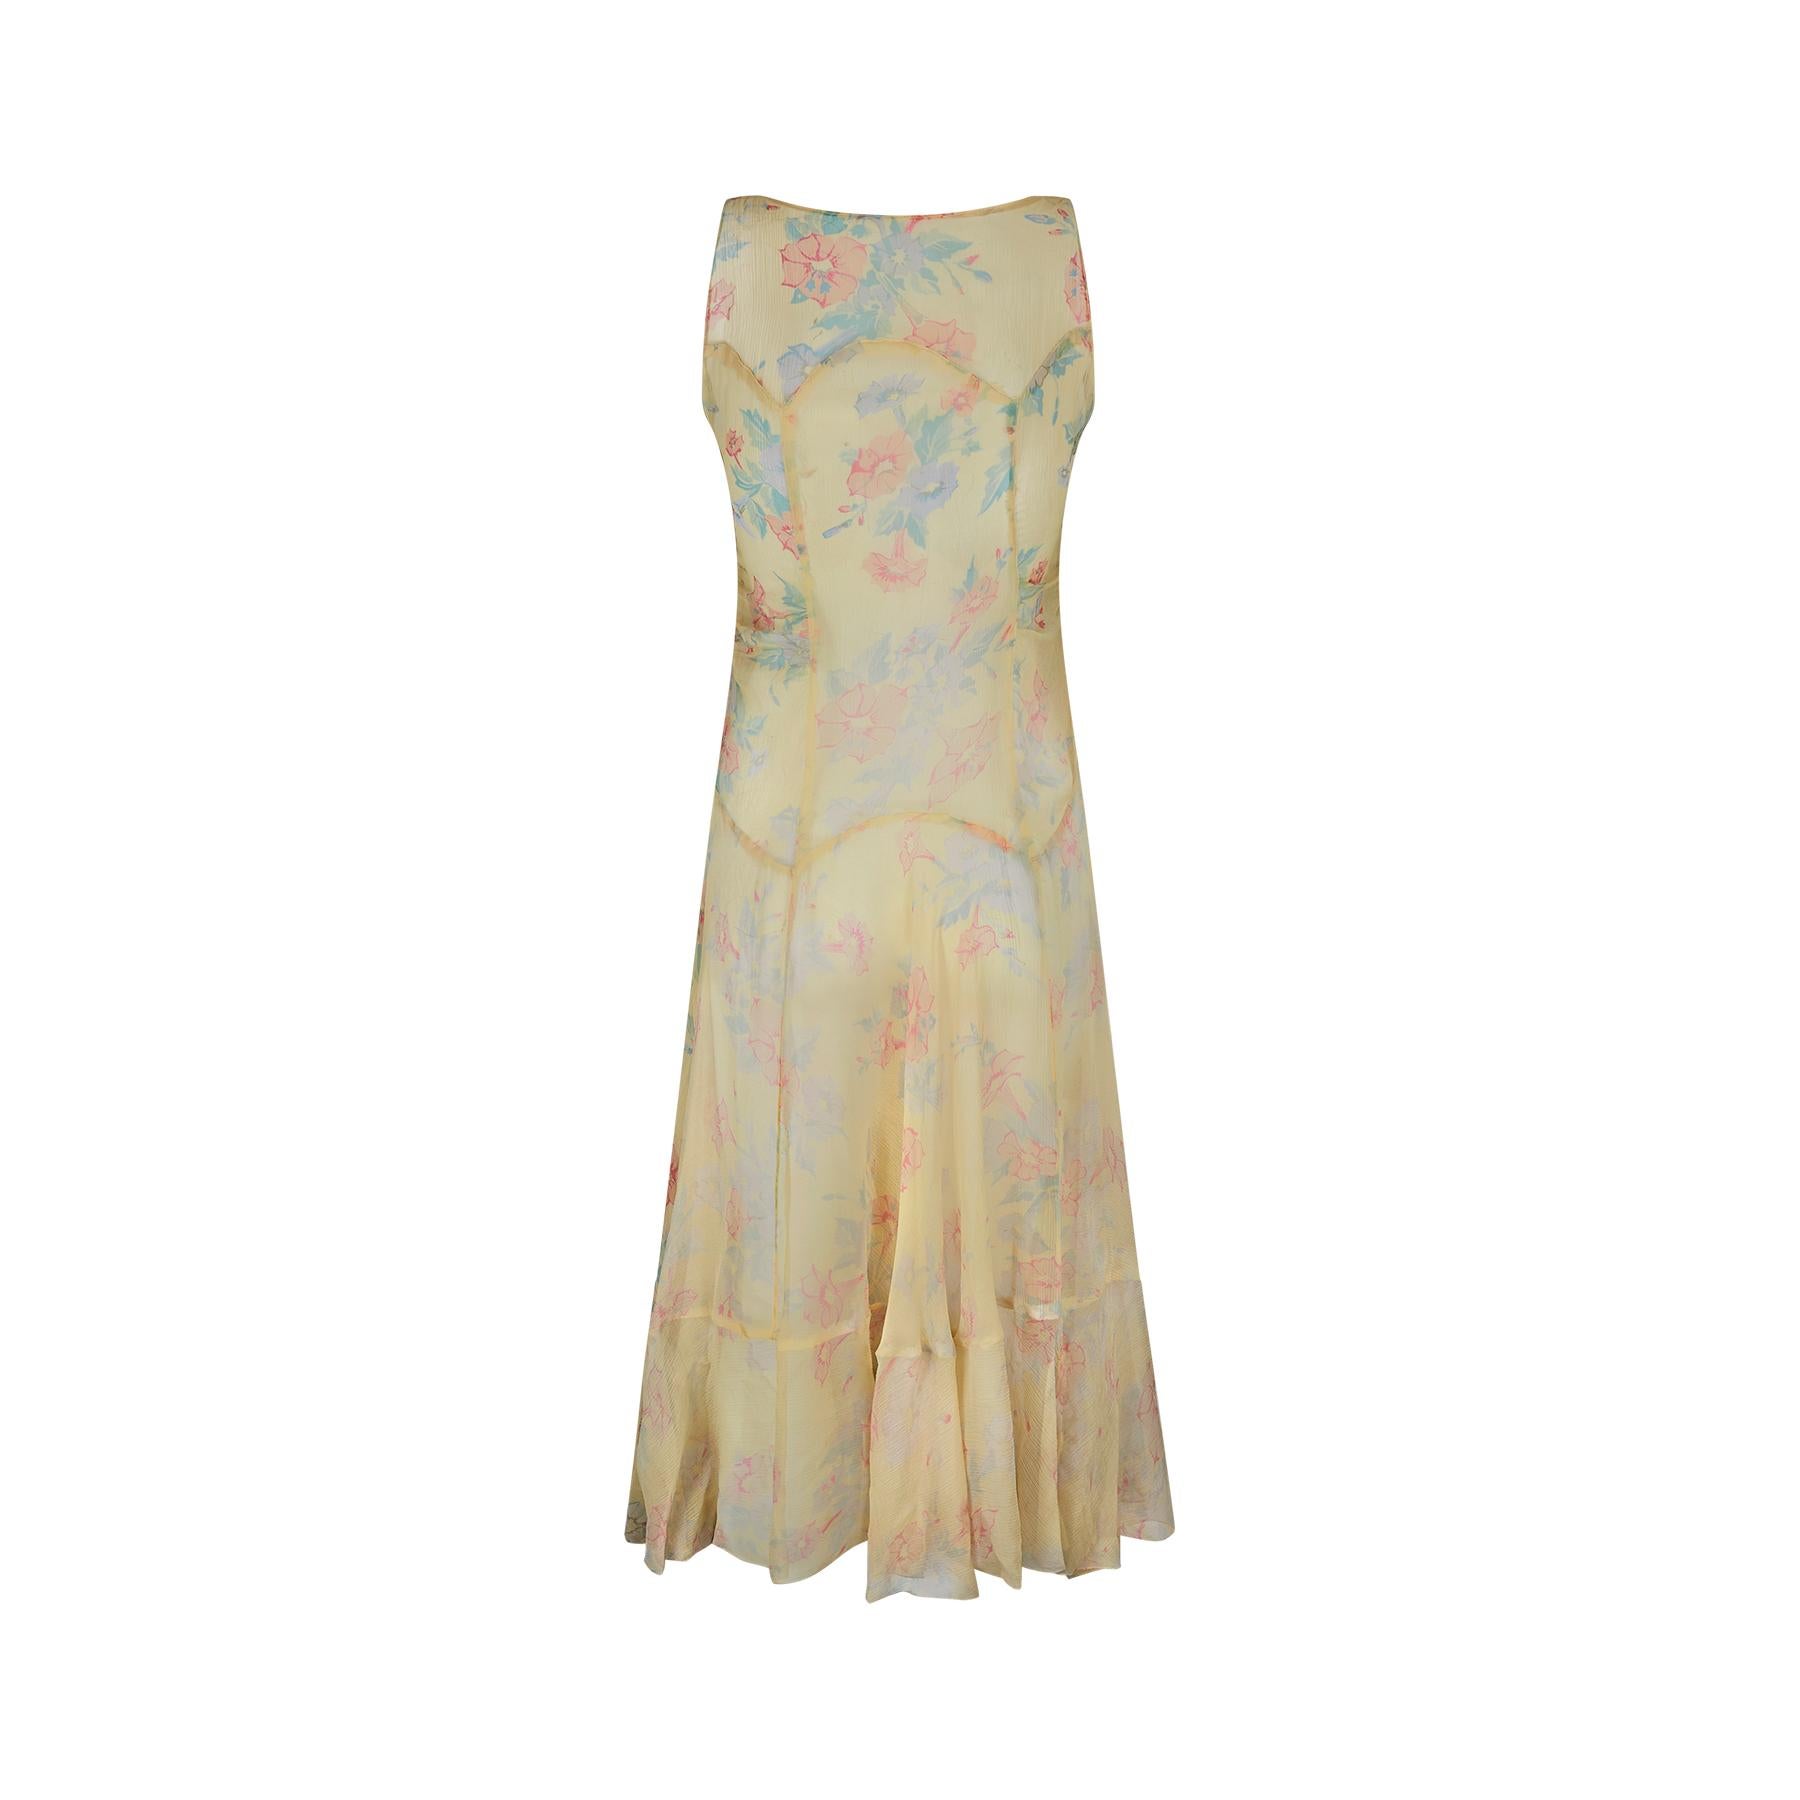 These original chiffon tea dresses are getting increasingly difficult to find in a wearable state and this dress is verging on exceptional antique condition. In beautiful pastel coloured hues of pale yellow, blues, greens and oranges and featuring